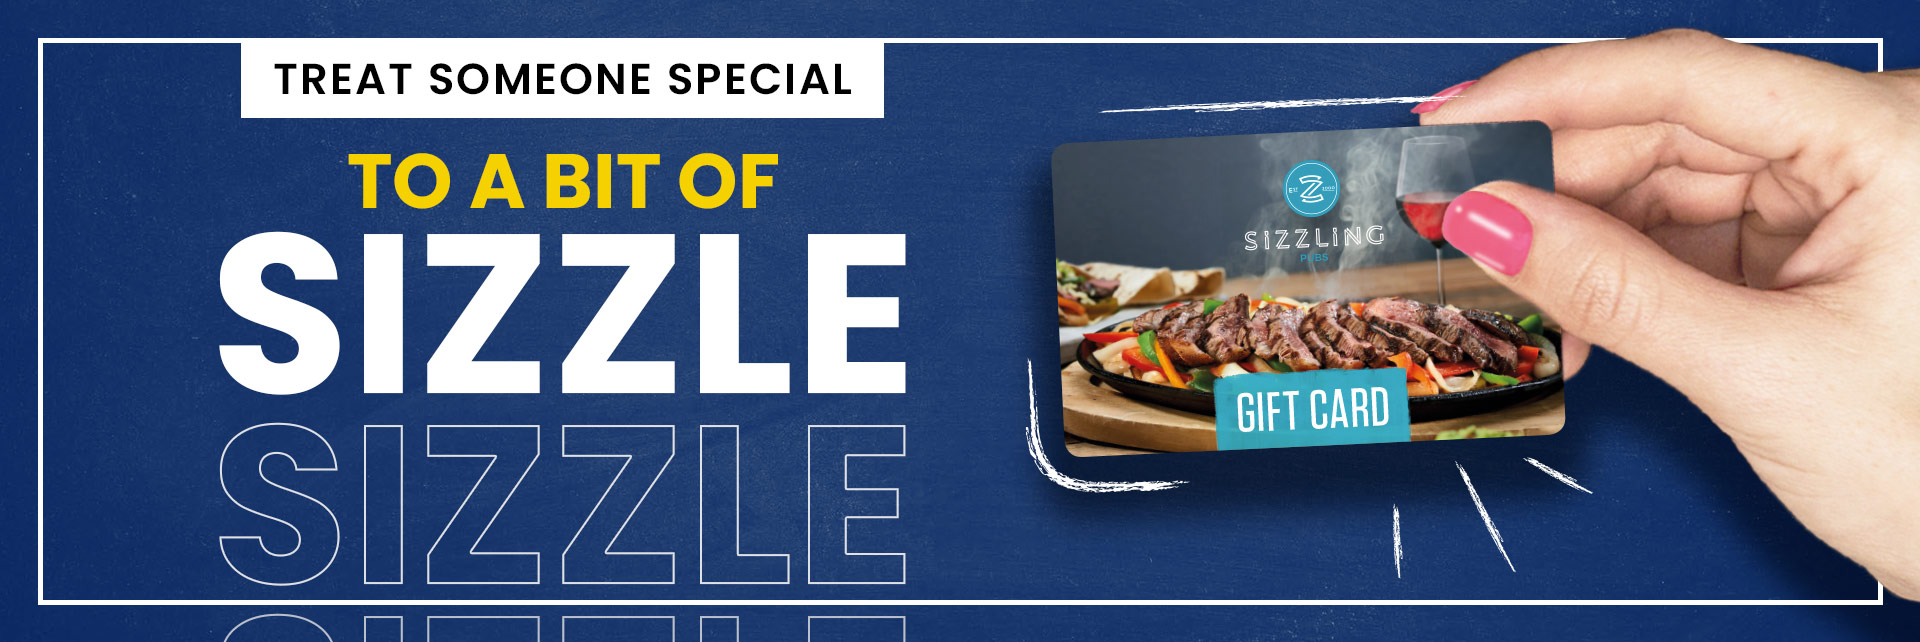 Sizzling Pubs Gift Card at The Sherwood in Preston